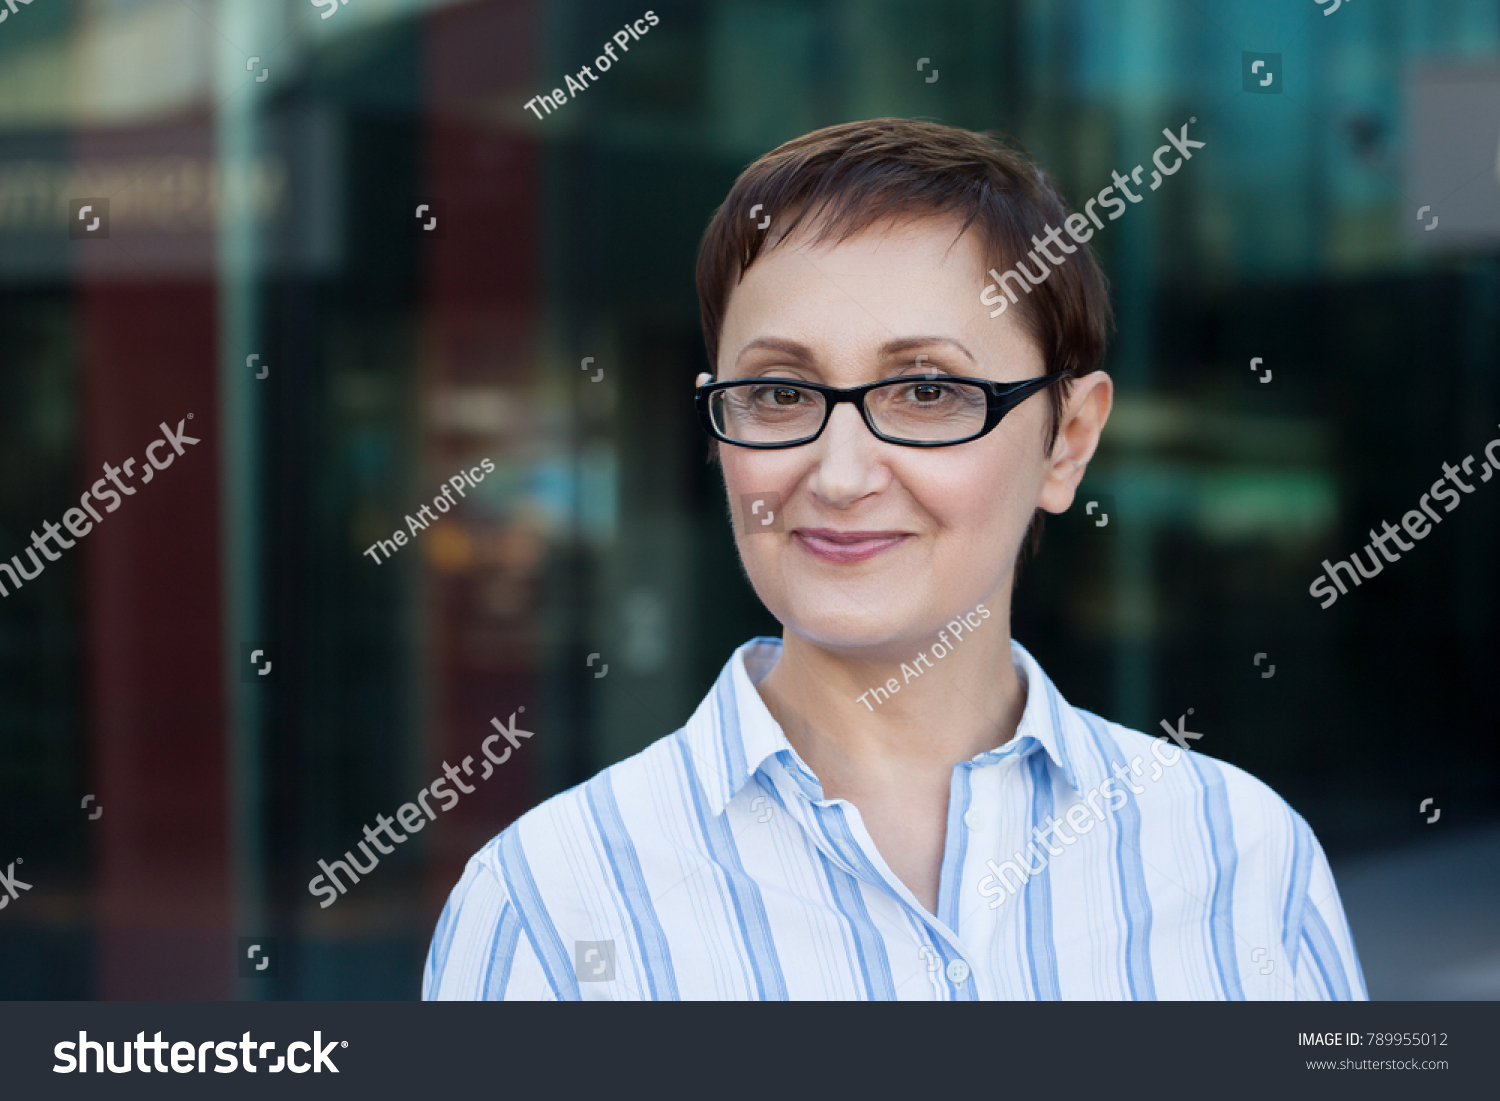 Older business woman headshot. Close-up portrait of executive, teacher, principal, CEO. Confident and successful middle aged woman 40 50 years old wearing glasses and shirt and smiling #789955012